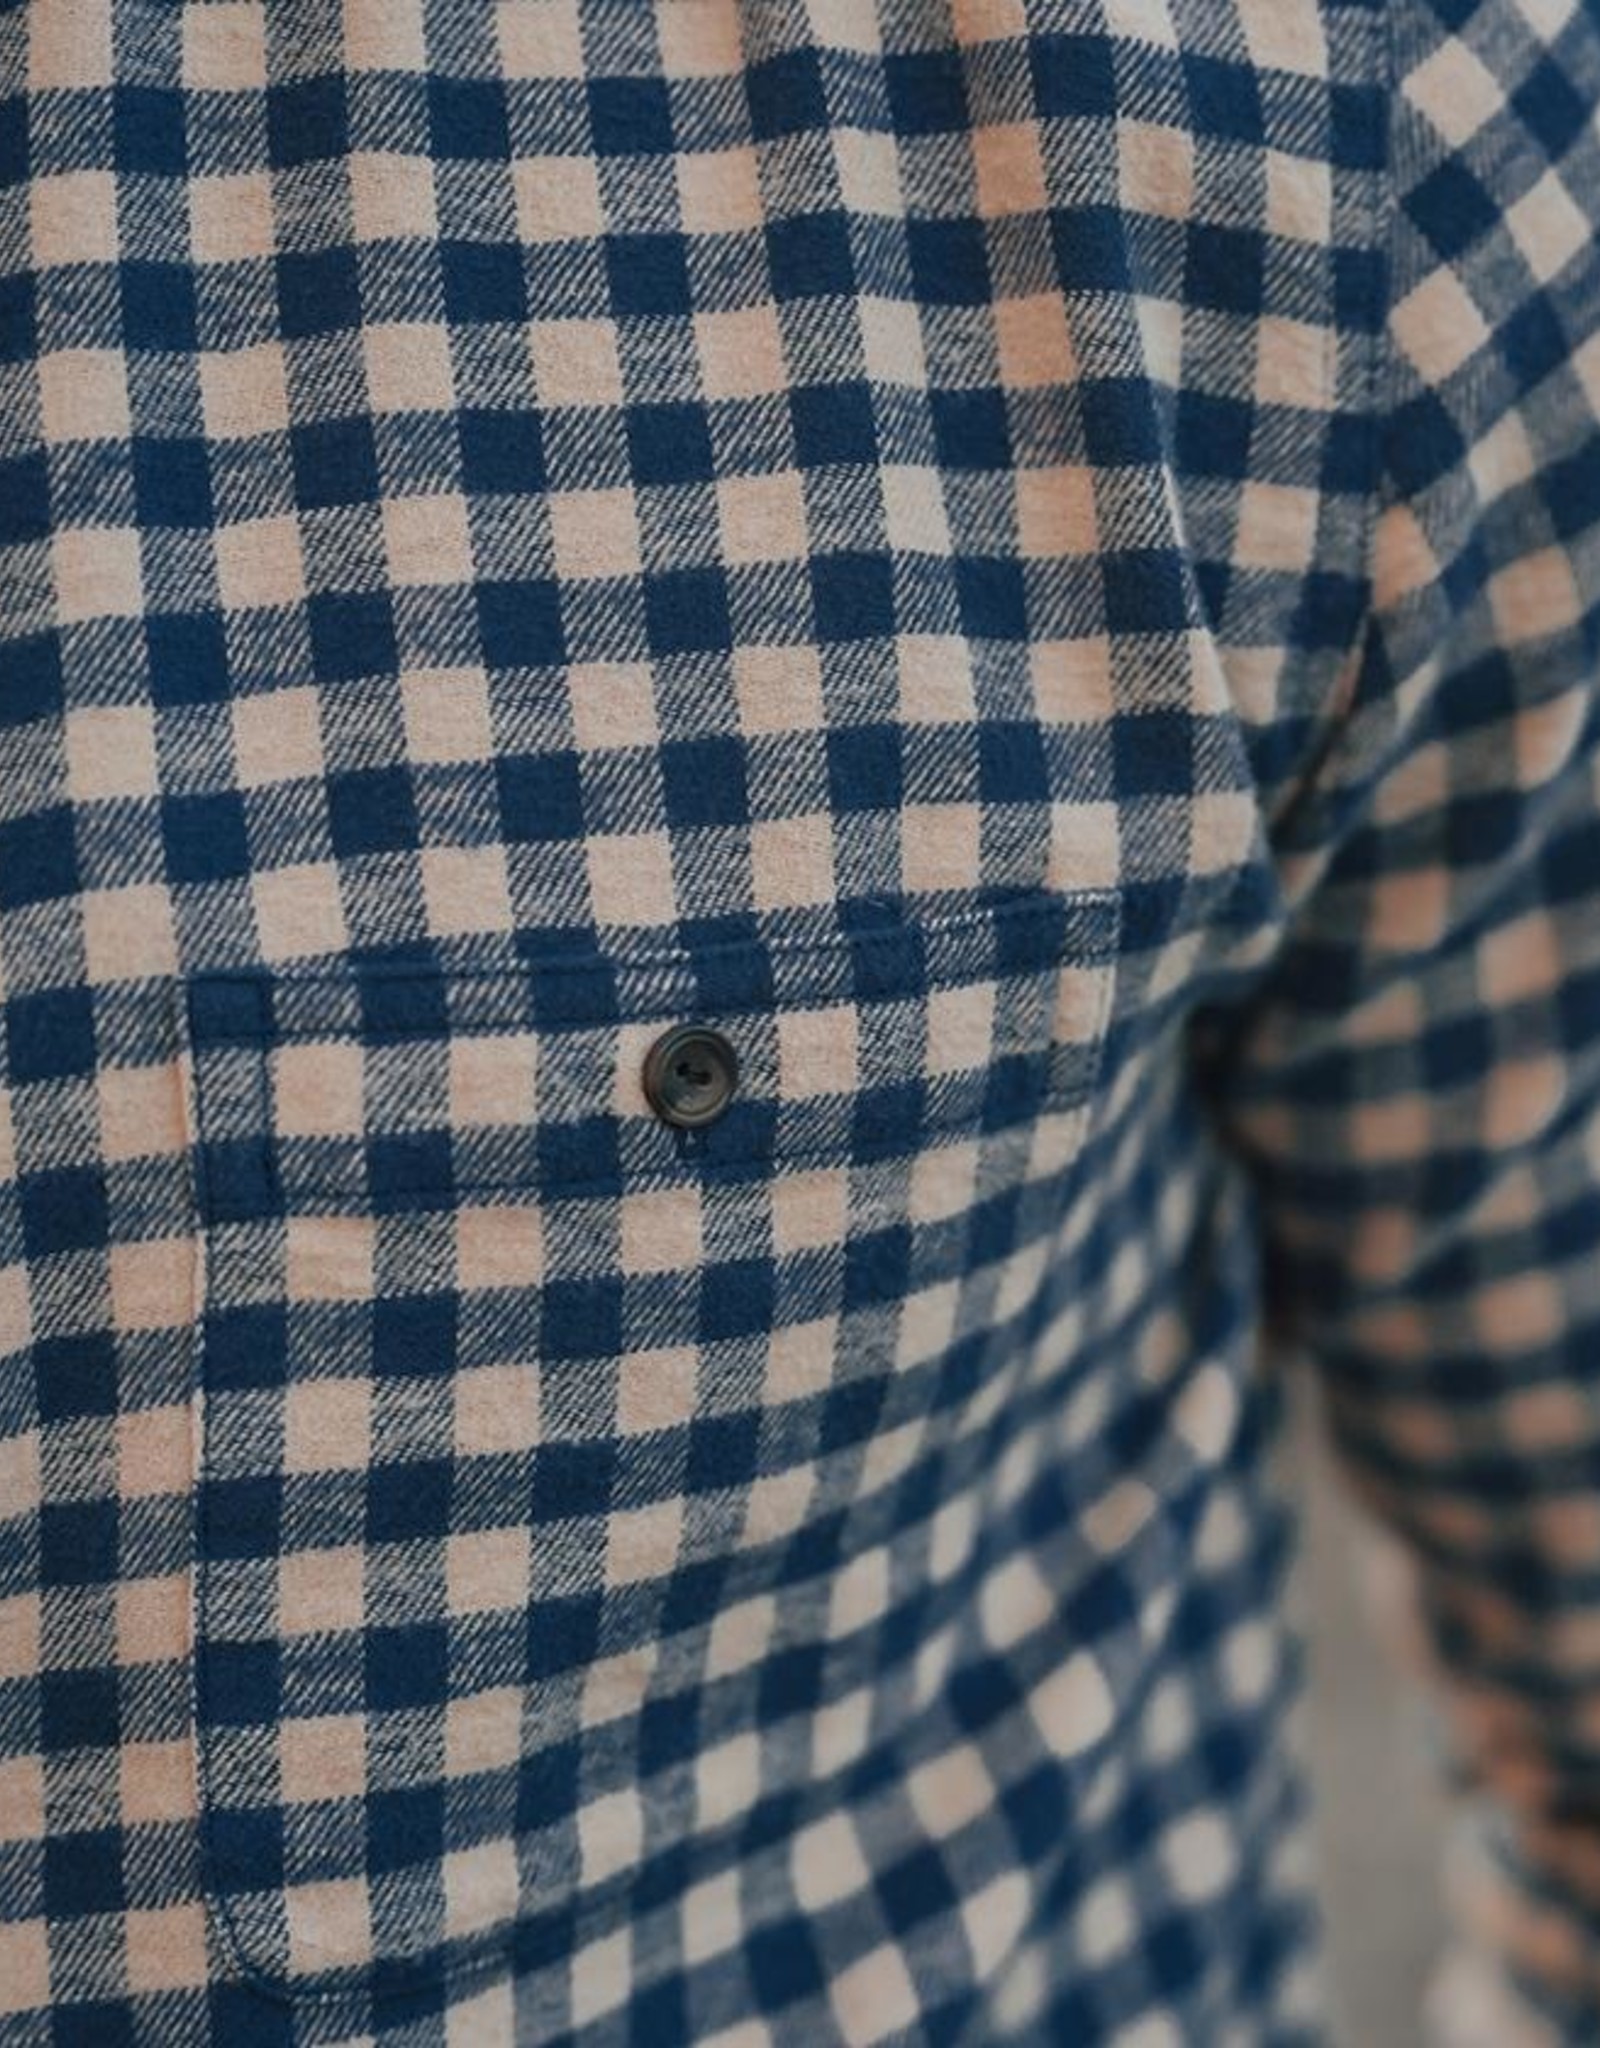 The Normal Brand Check Flannel